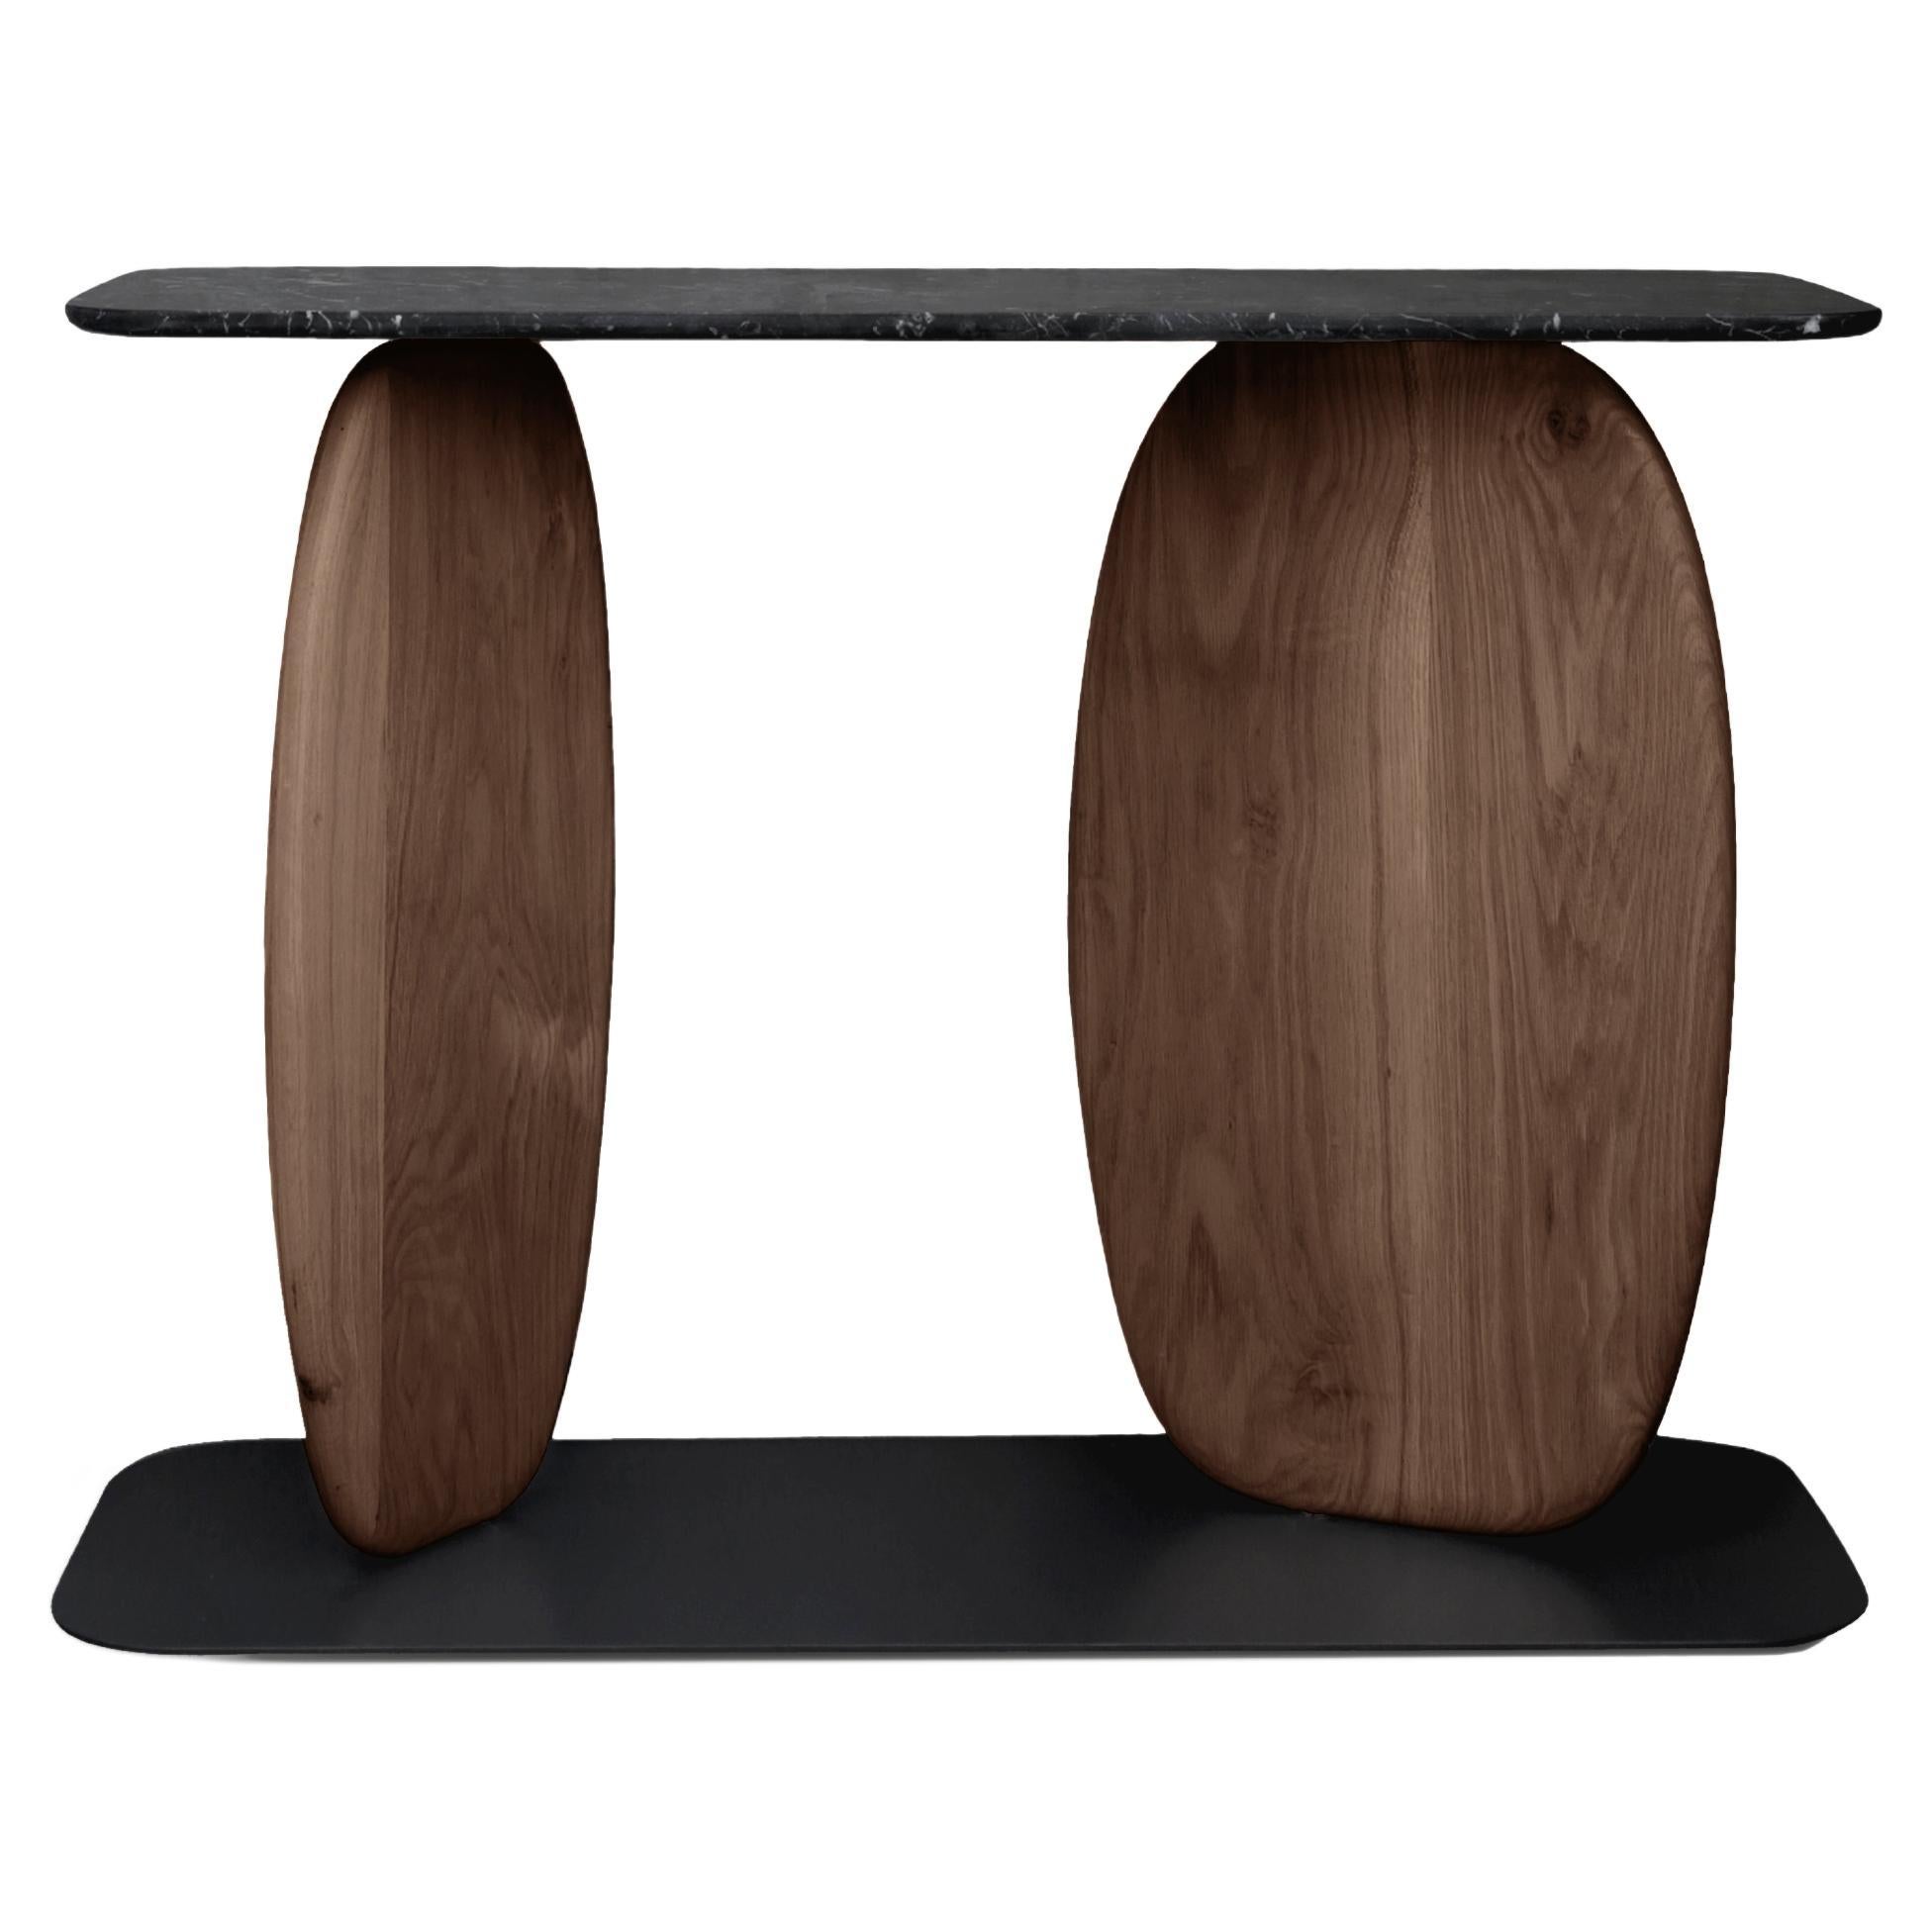 Noviembre VII Sideboard in Walnut Wood and Marble Top, Console by Joel Escalona For Sale